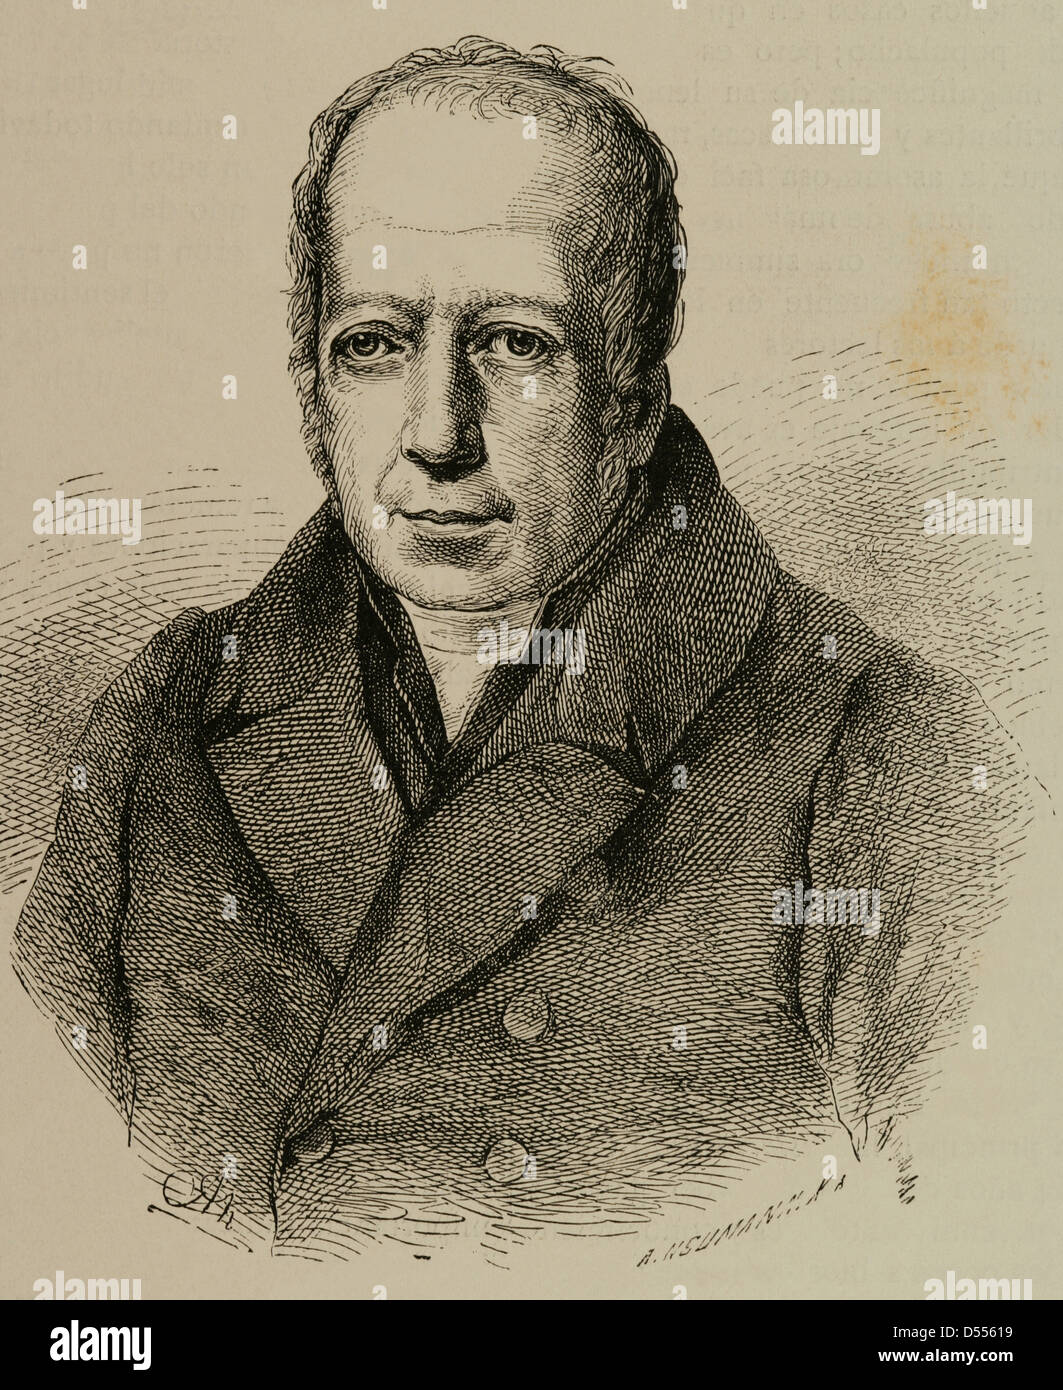 Alexander von Humboldt (1769-1859). German naturalist and geographer. Engraving of A. Neumann in Our Century, 1883. Stock Photo